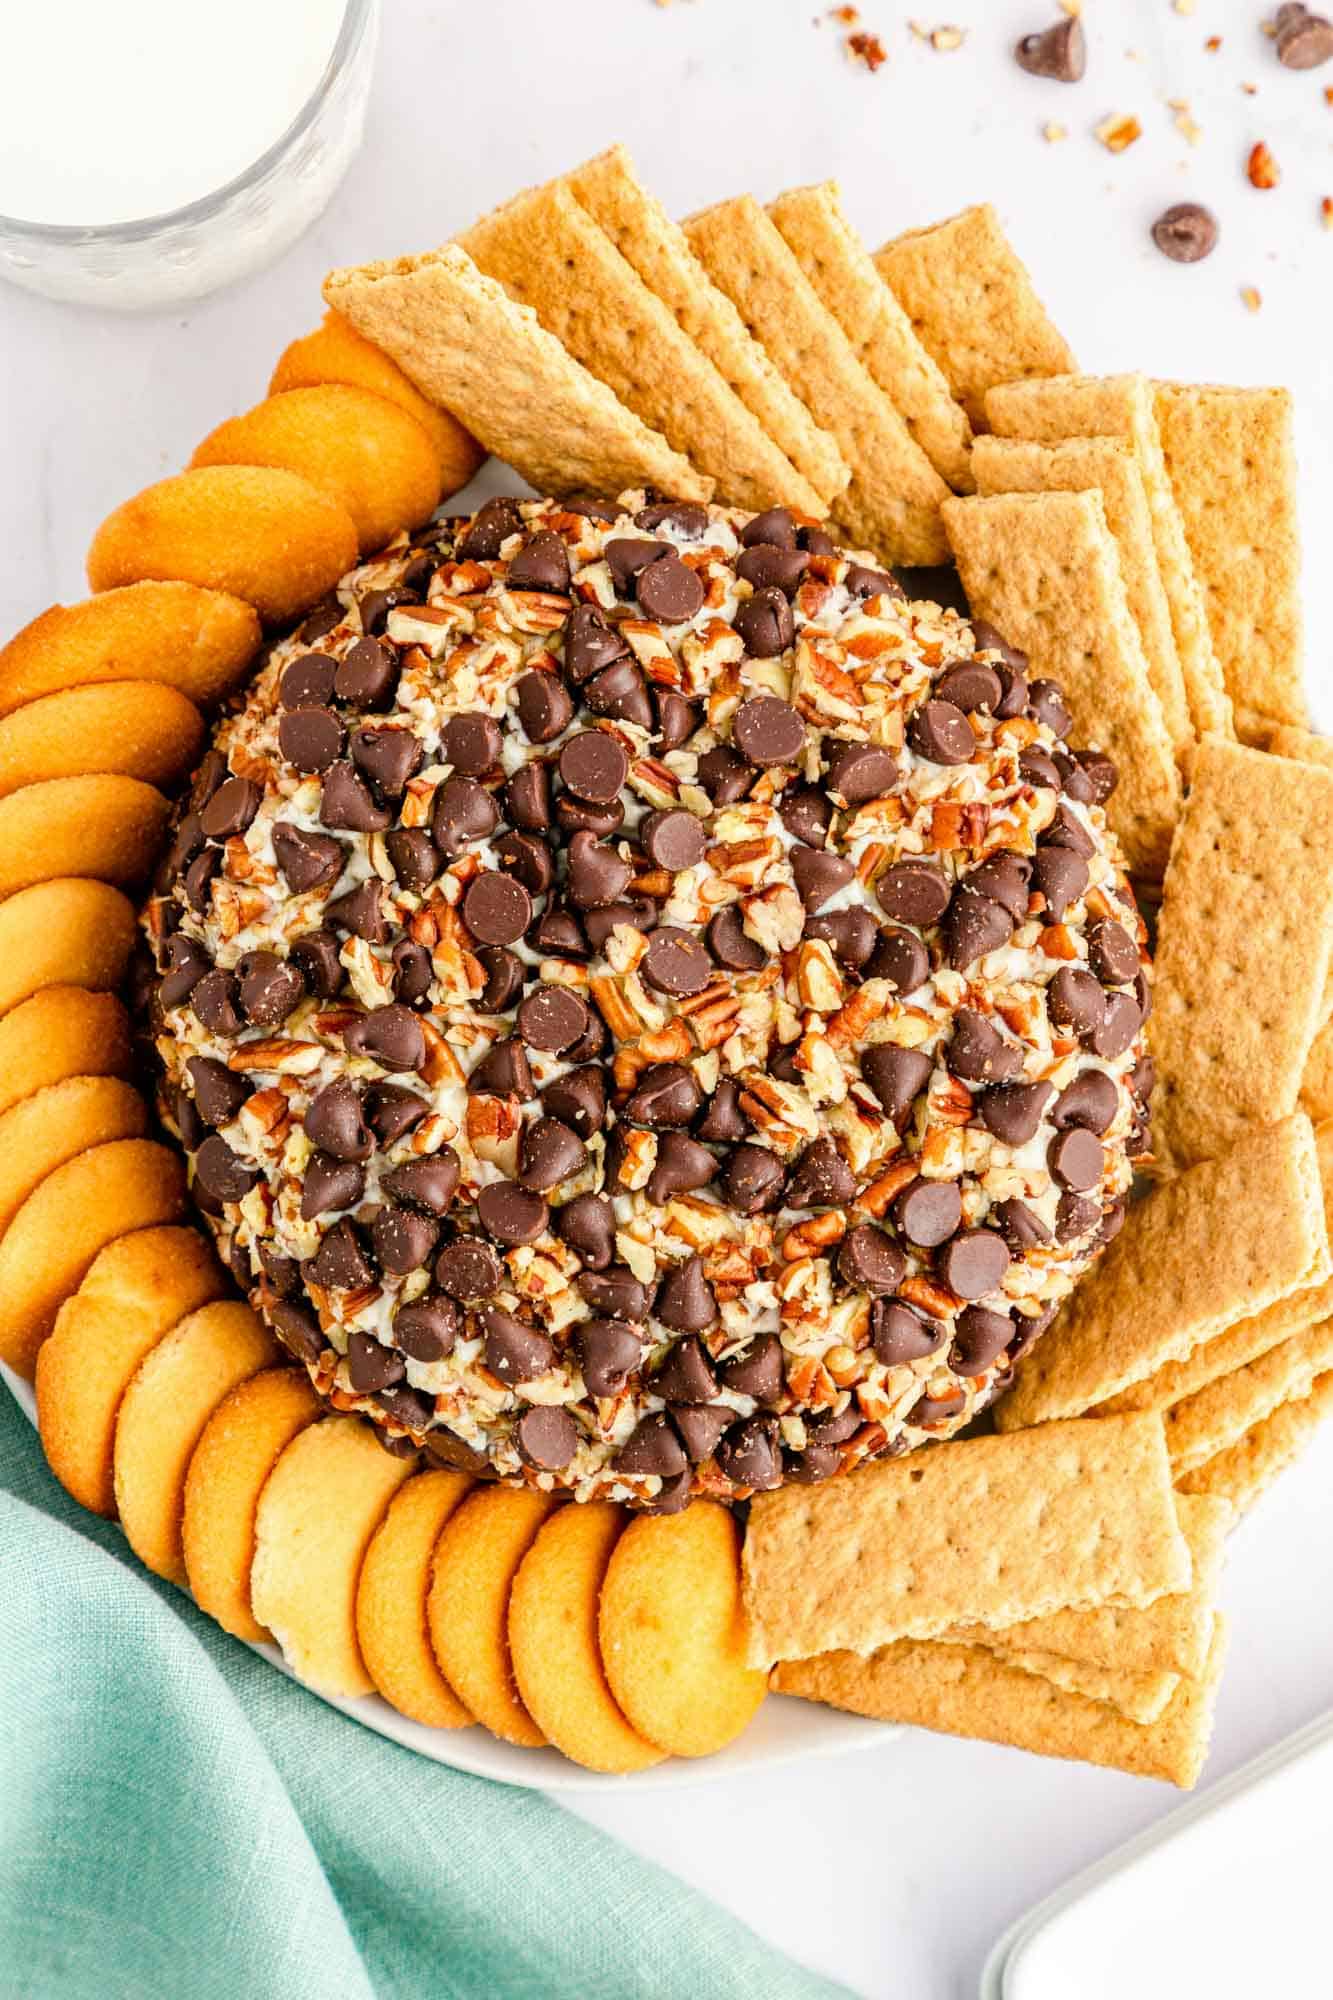 a cream cheese ball with pecans and chocolate chips, surrounded by graham crackers and nilla wafers